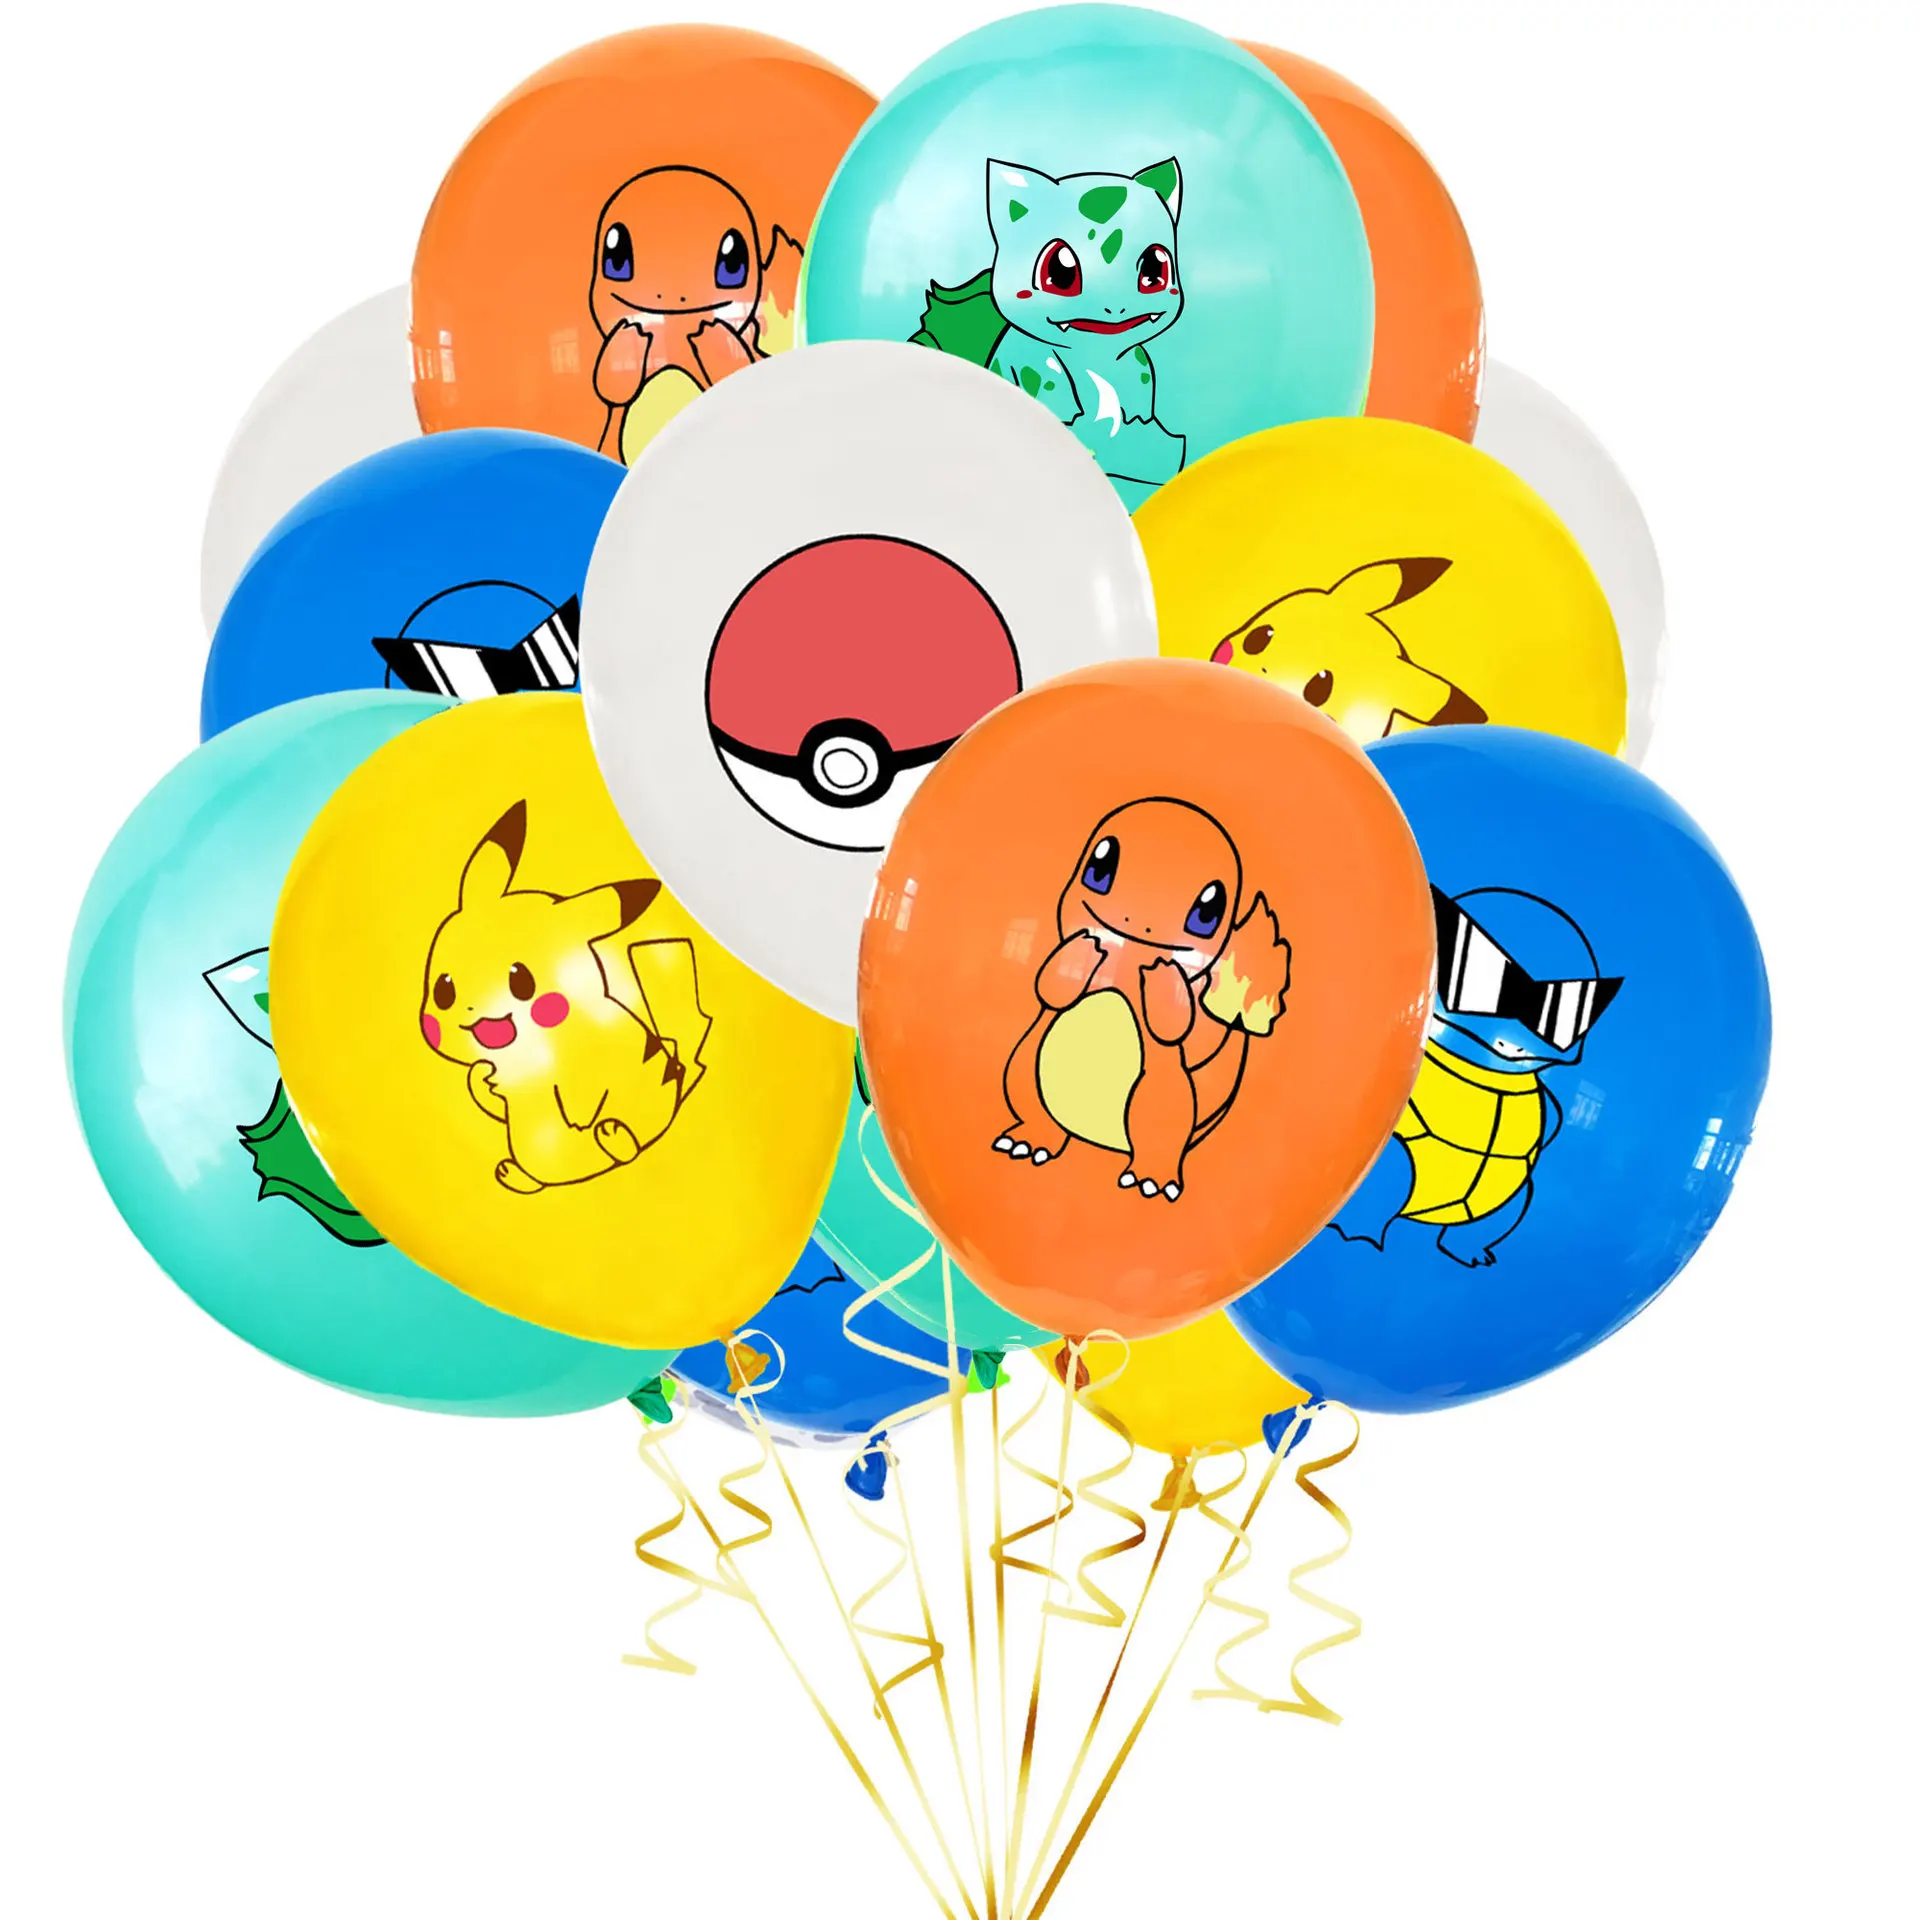 

Pokemon Theme Sequined Balloon Suit Kids Birthday Party Decoration Children's Day Pokemon Bikachu Squirtle Toy Balloons Gifts